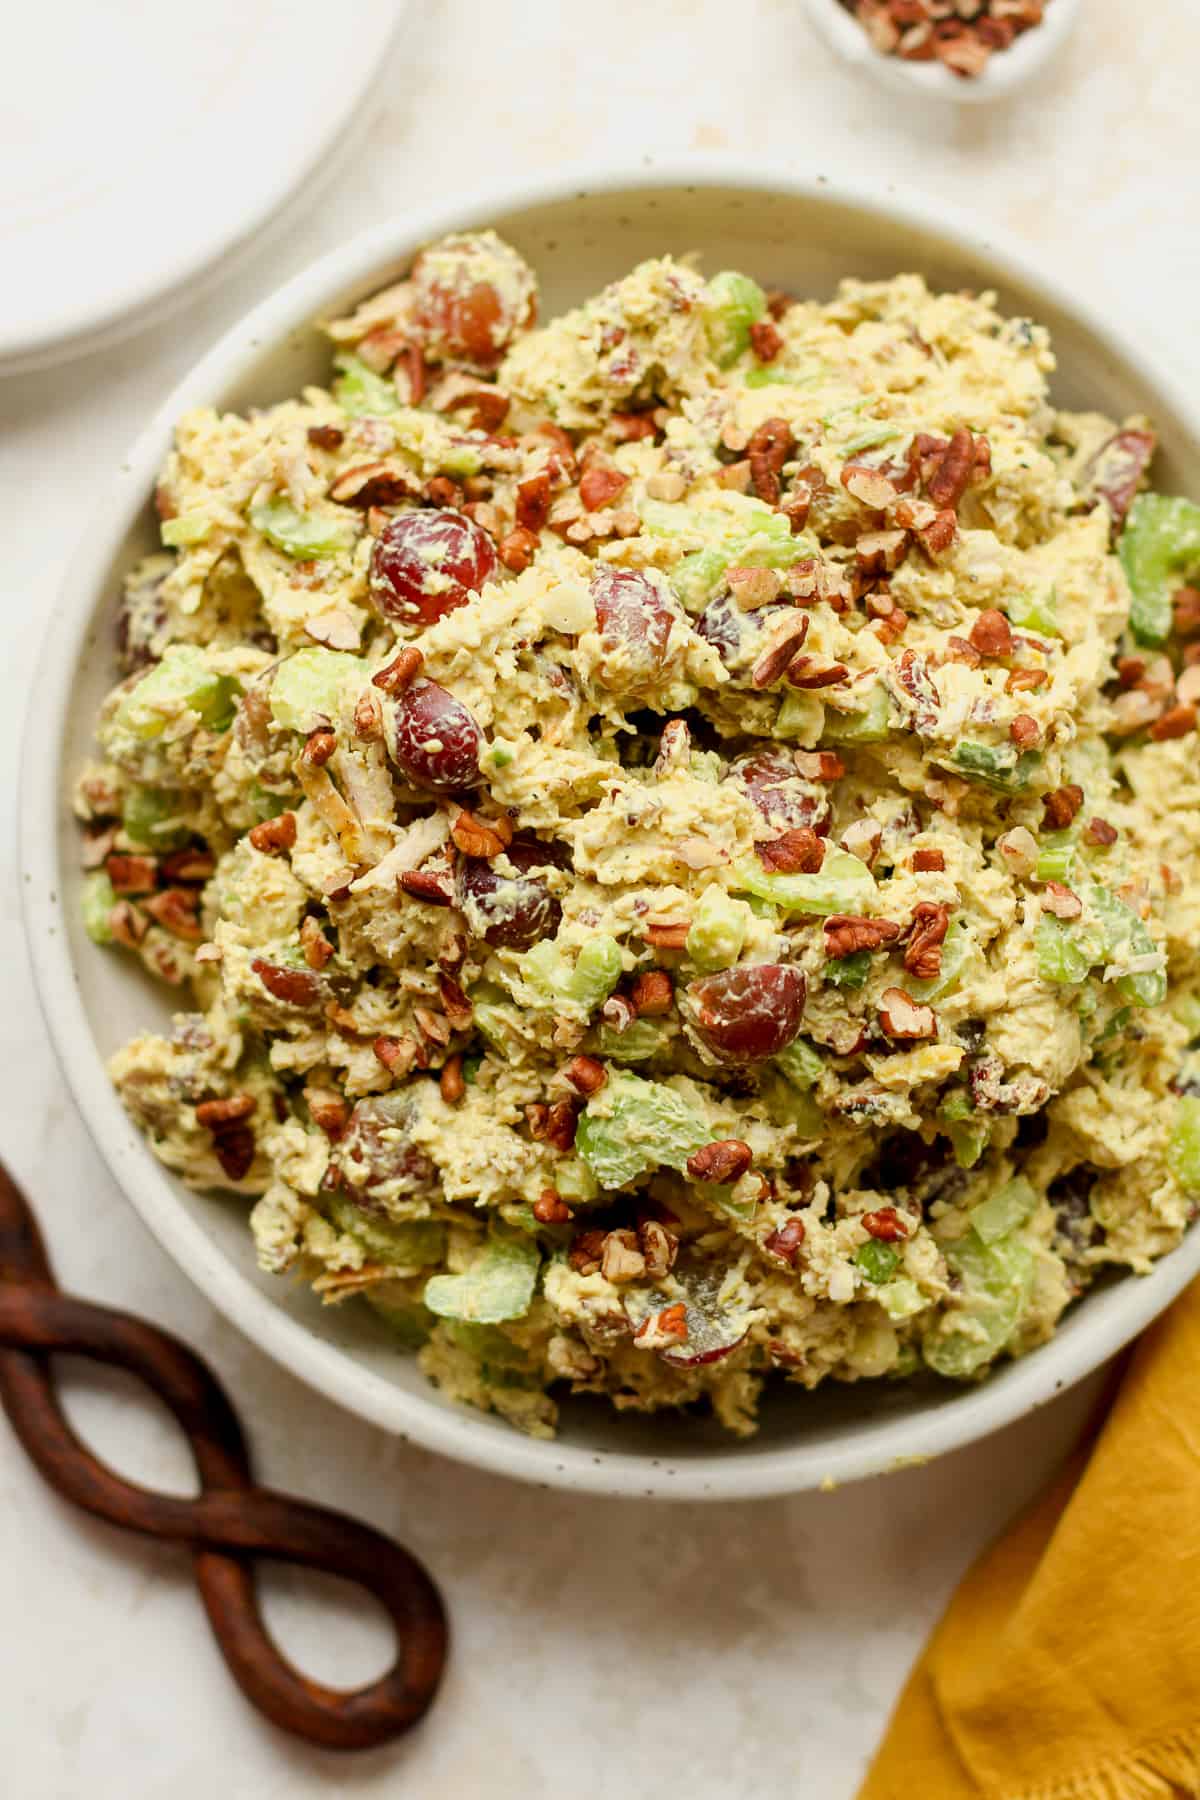 A bowl of chicken salad with grapes, celery, and pecans.